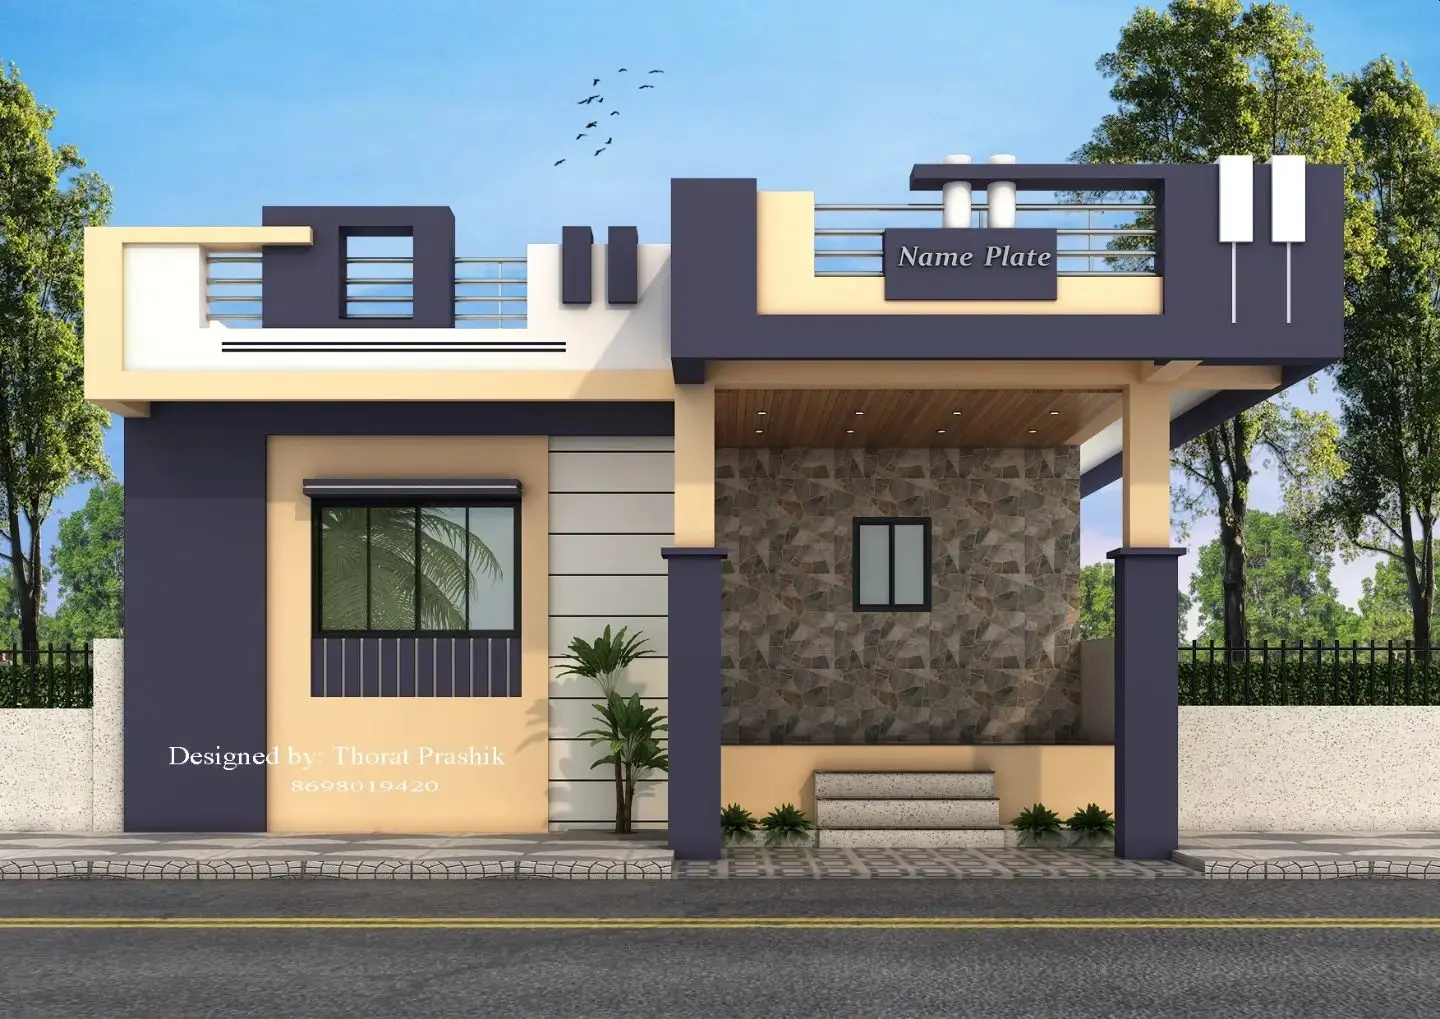 The 3D animated front elevation design of this small house by Prashik Thorat looks fine